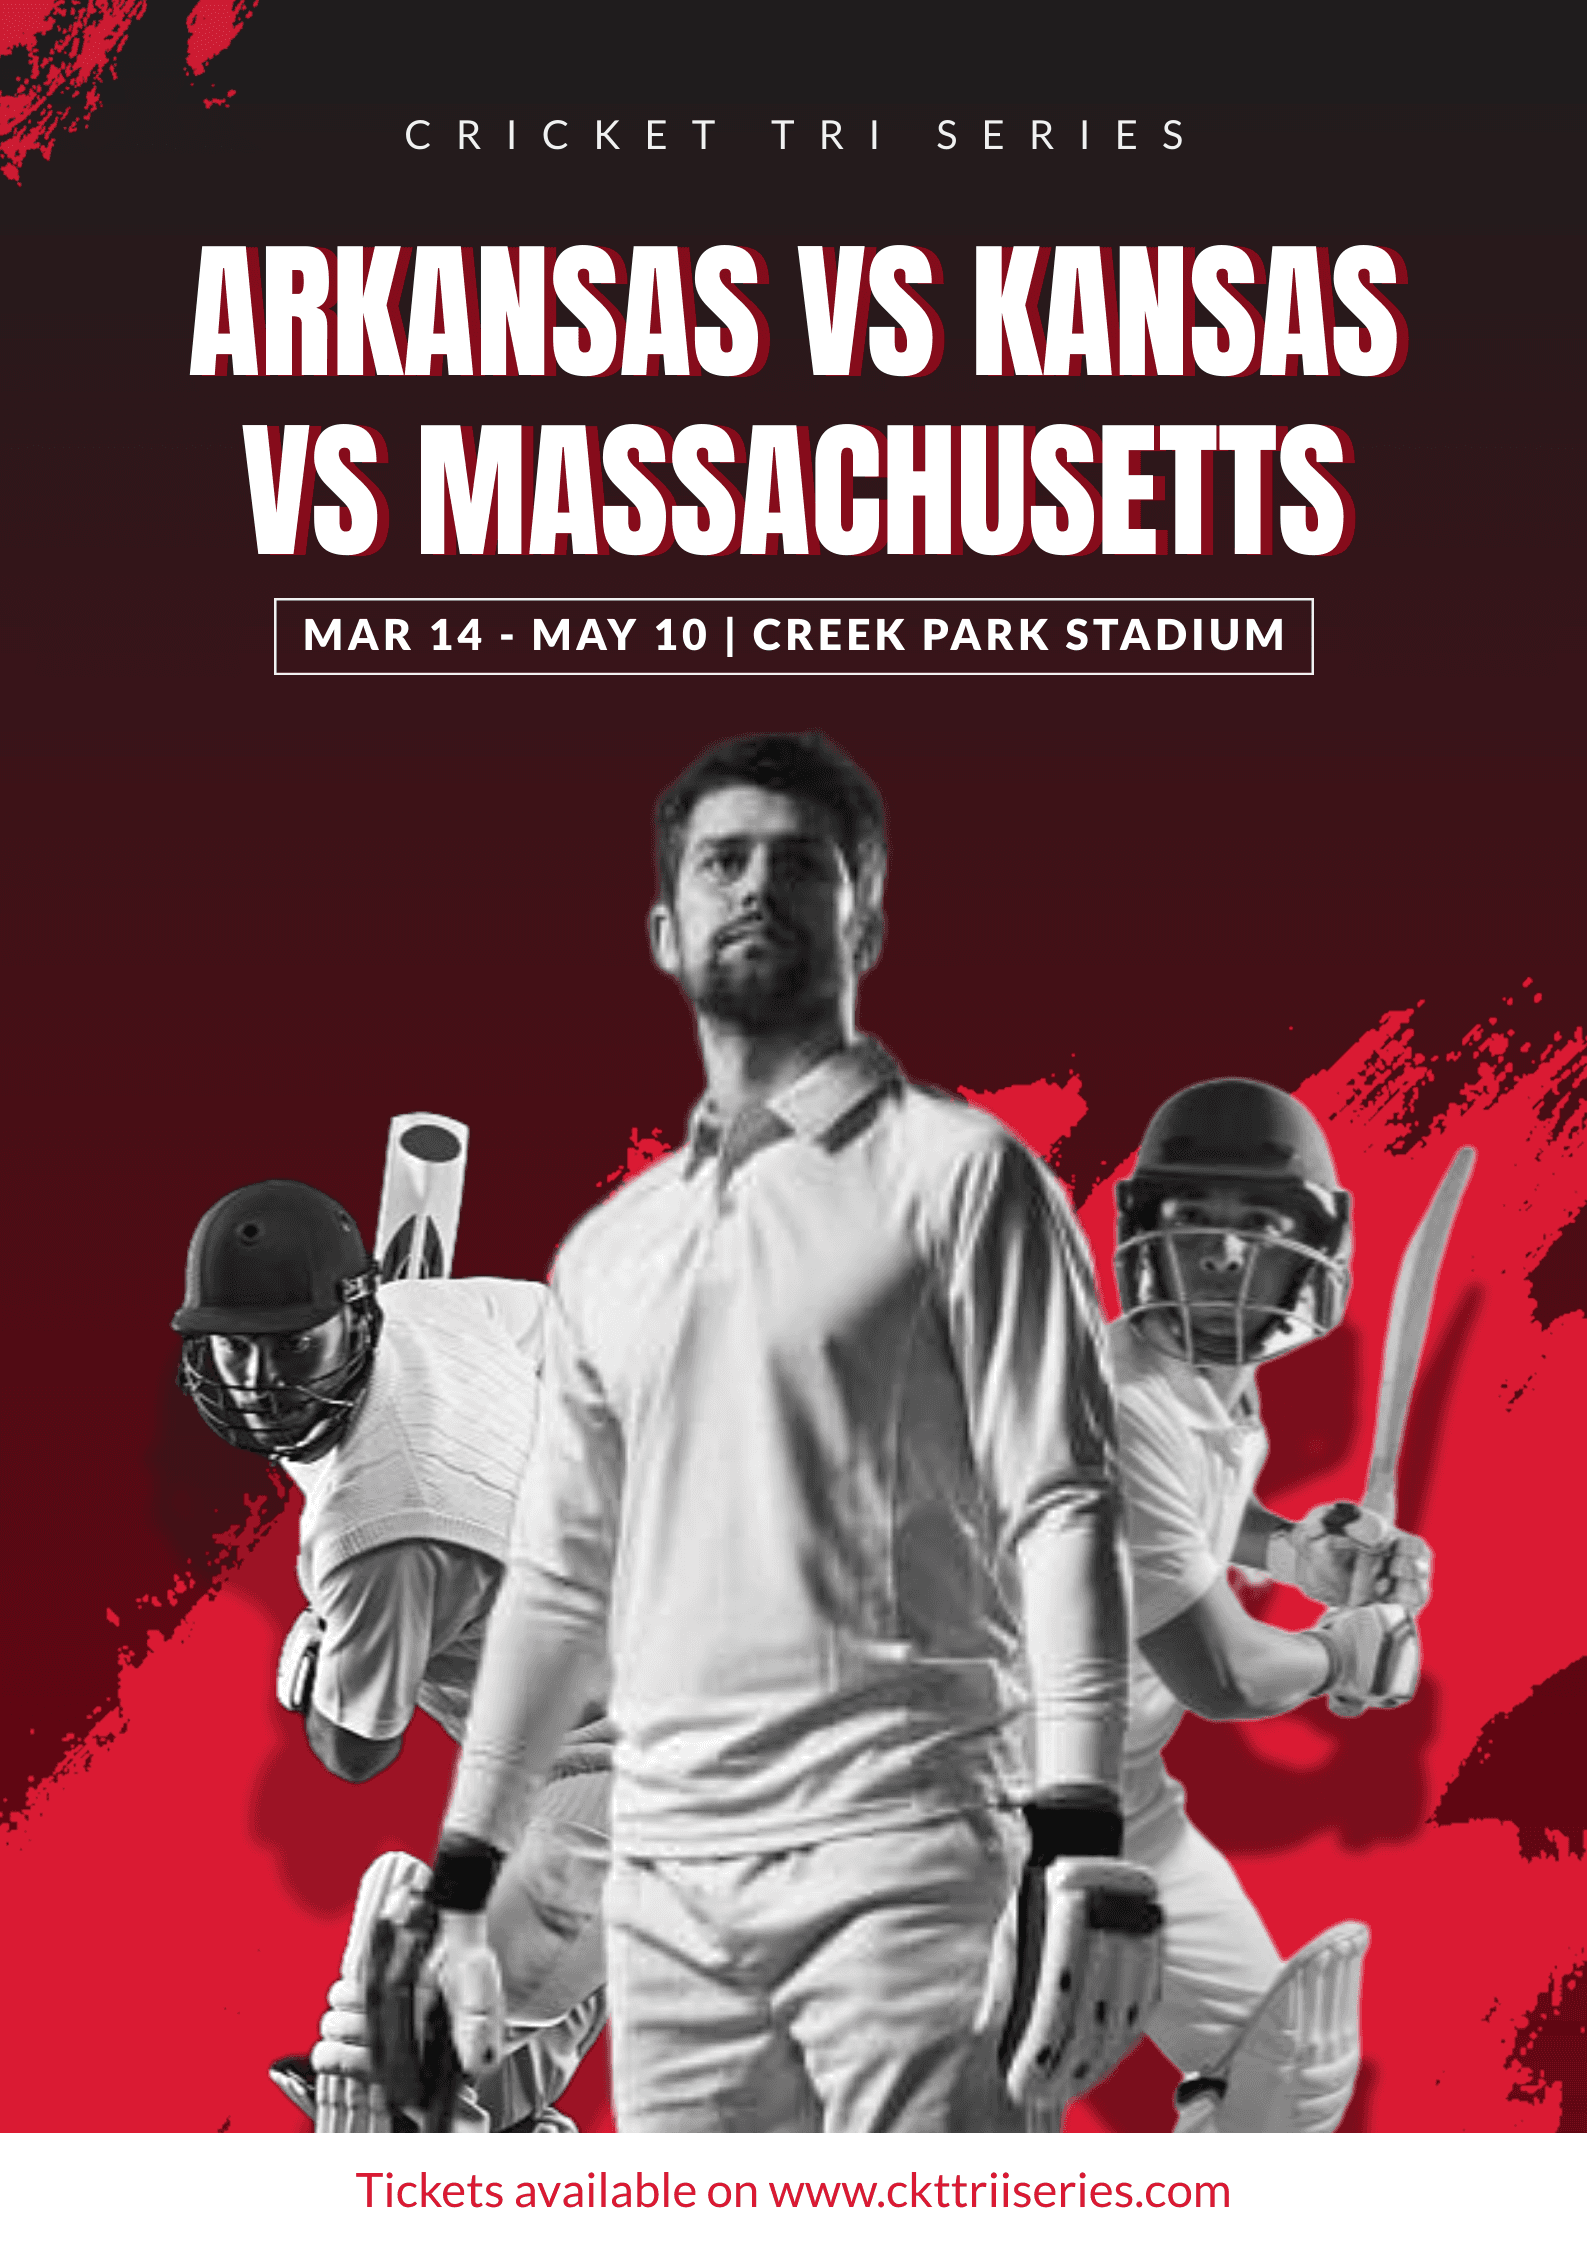 maroon-background-cricket-tri-series-poster-template-thumbnail-img